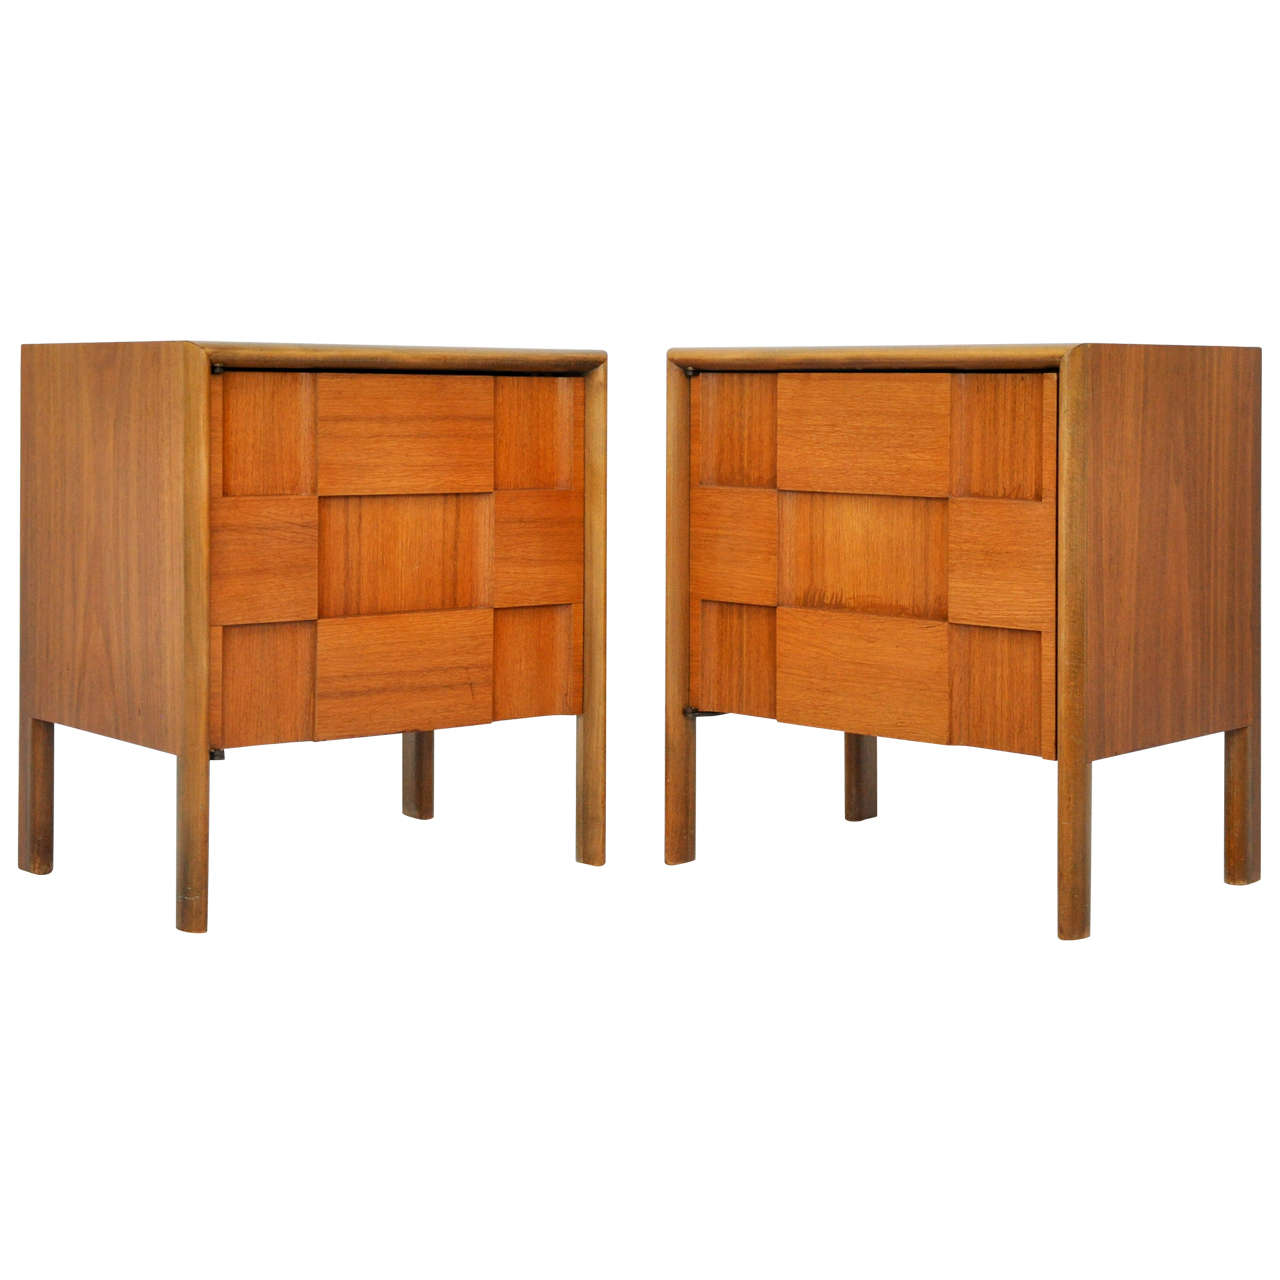 Pair of nightstands by Edmond Spence. Made in Sweden.

Other items from this set are available.